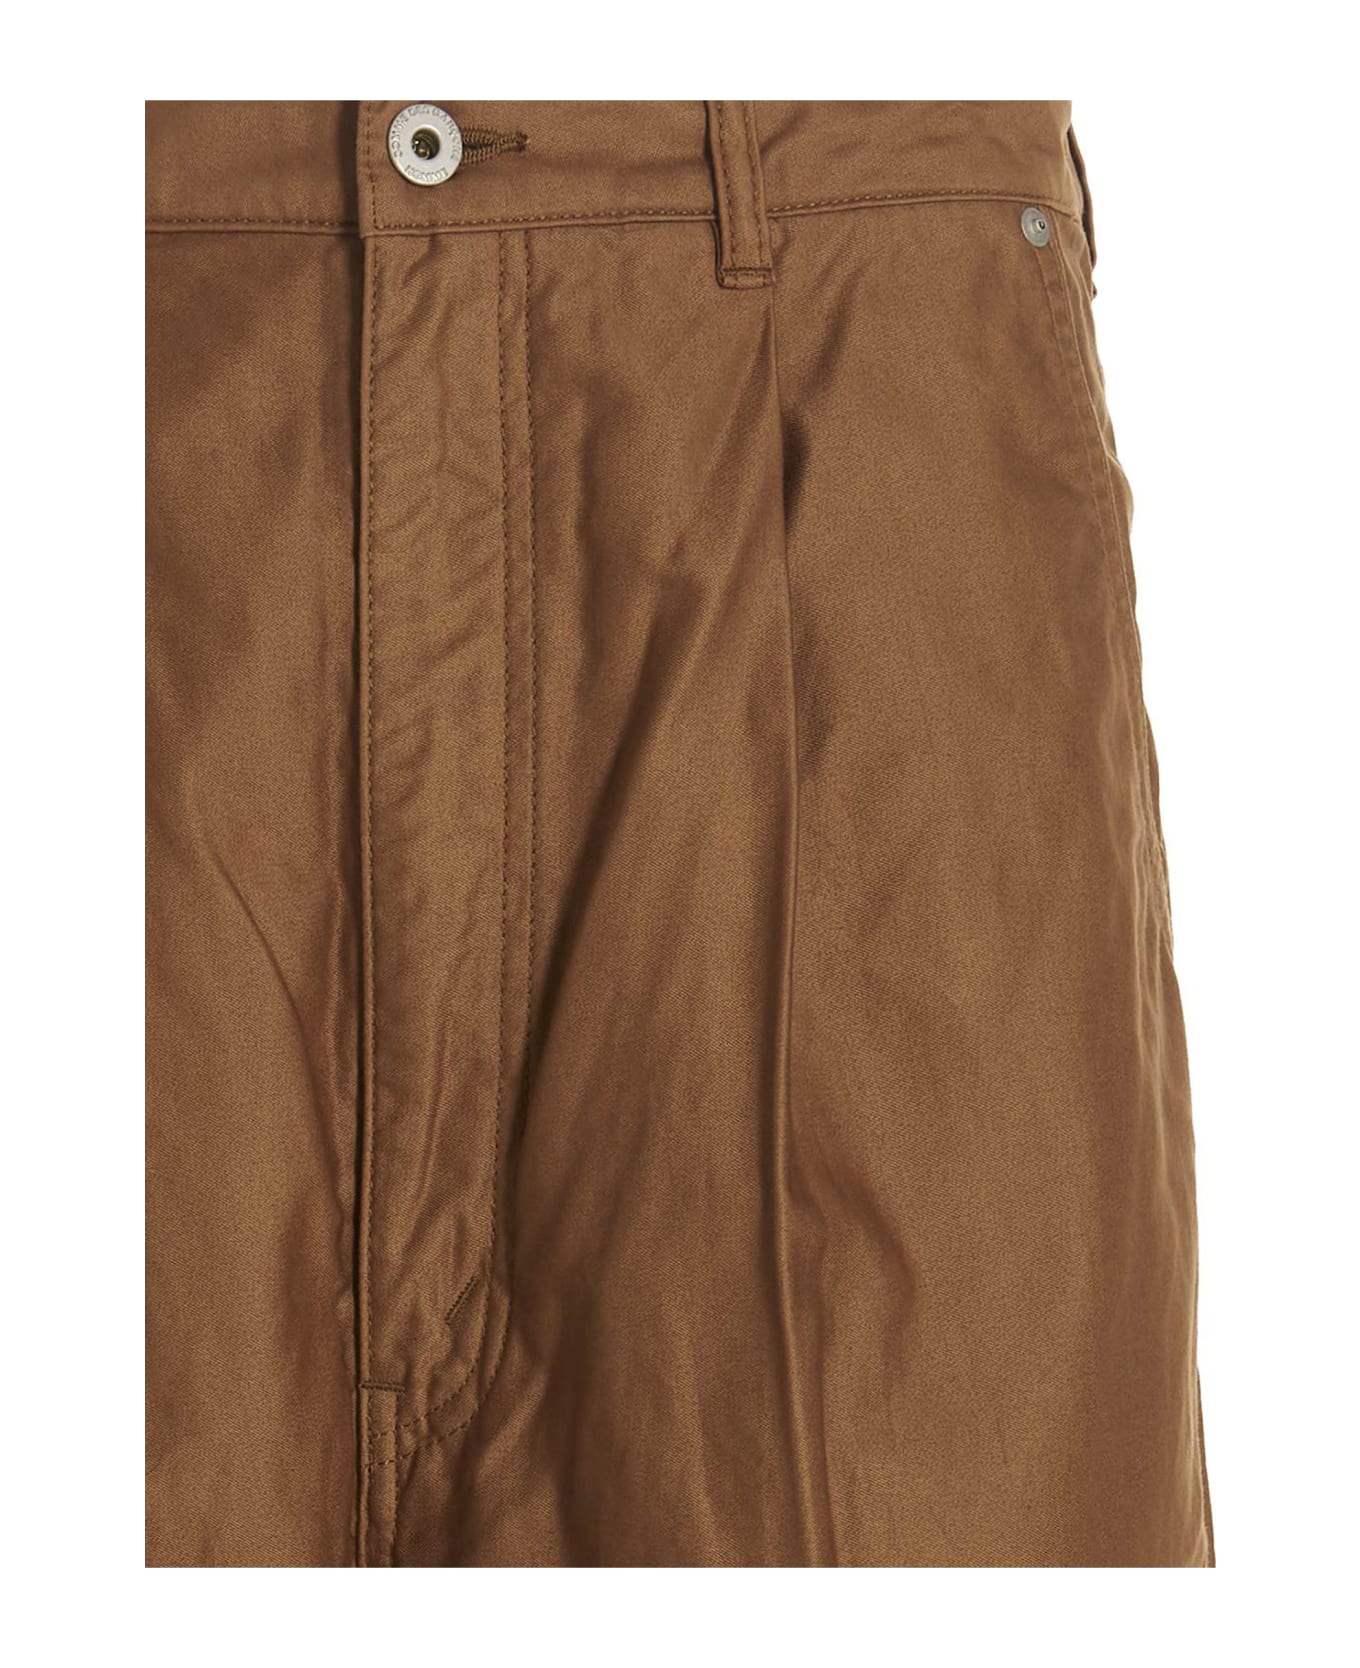 Comme des Garçons Homme Relaxed Chinos - Beige